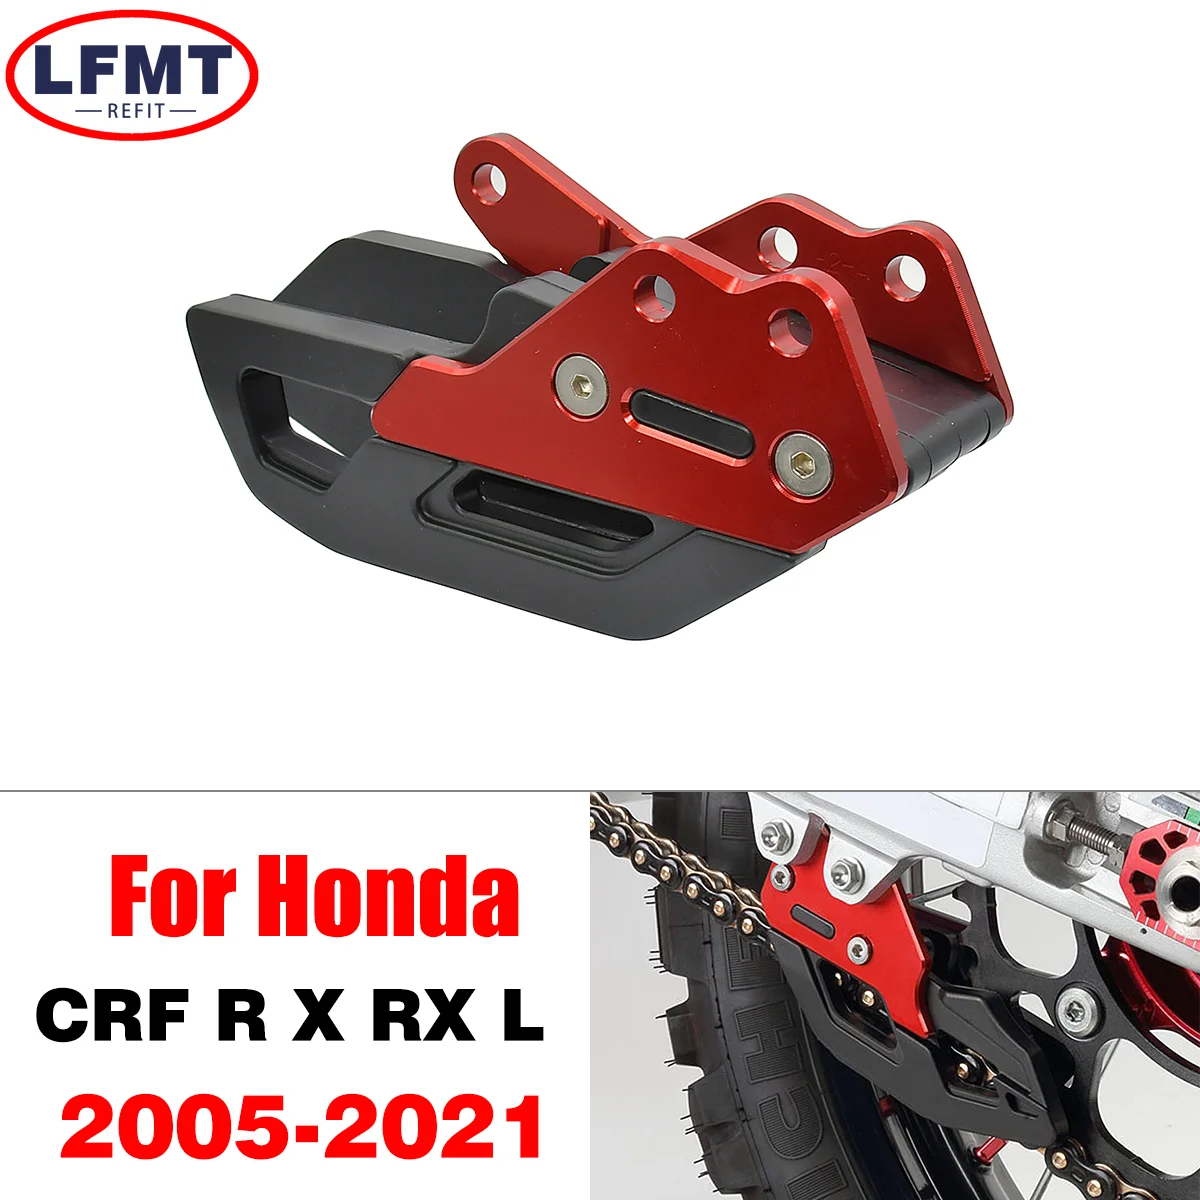 

Motorcycle CNC Chain Guide Guard For Honda CRF250R CRF450R CR125 CR250 CRF450RX CRF250RX CRF 250R 450R CR 125 250 RX R 2005-2021